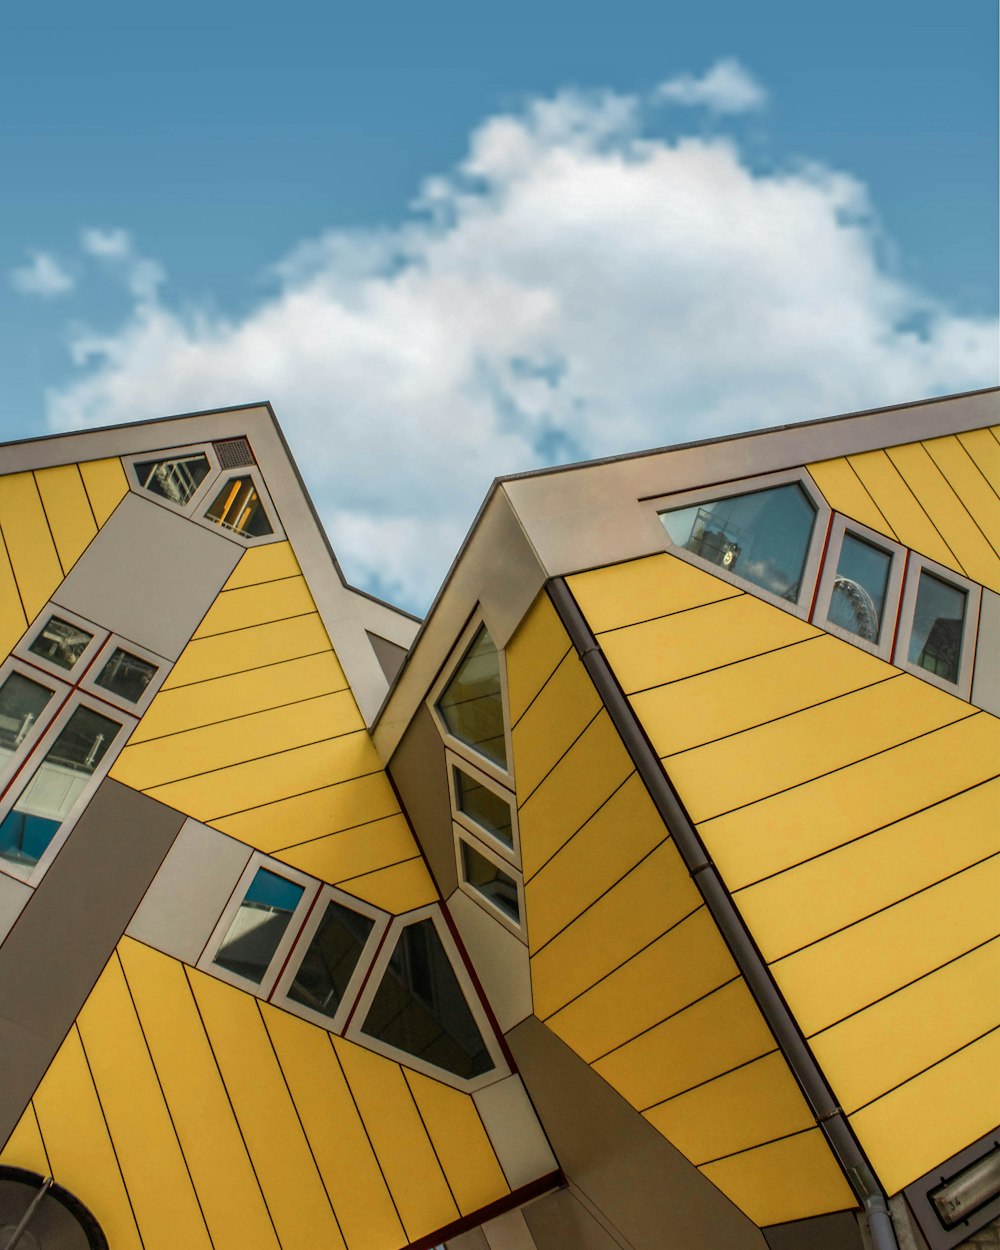 architectural photography of yellow and gray house roof